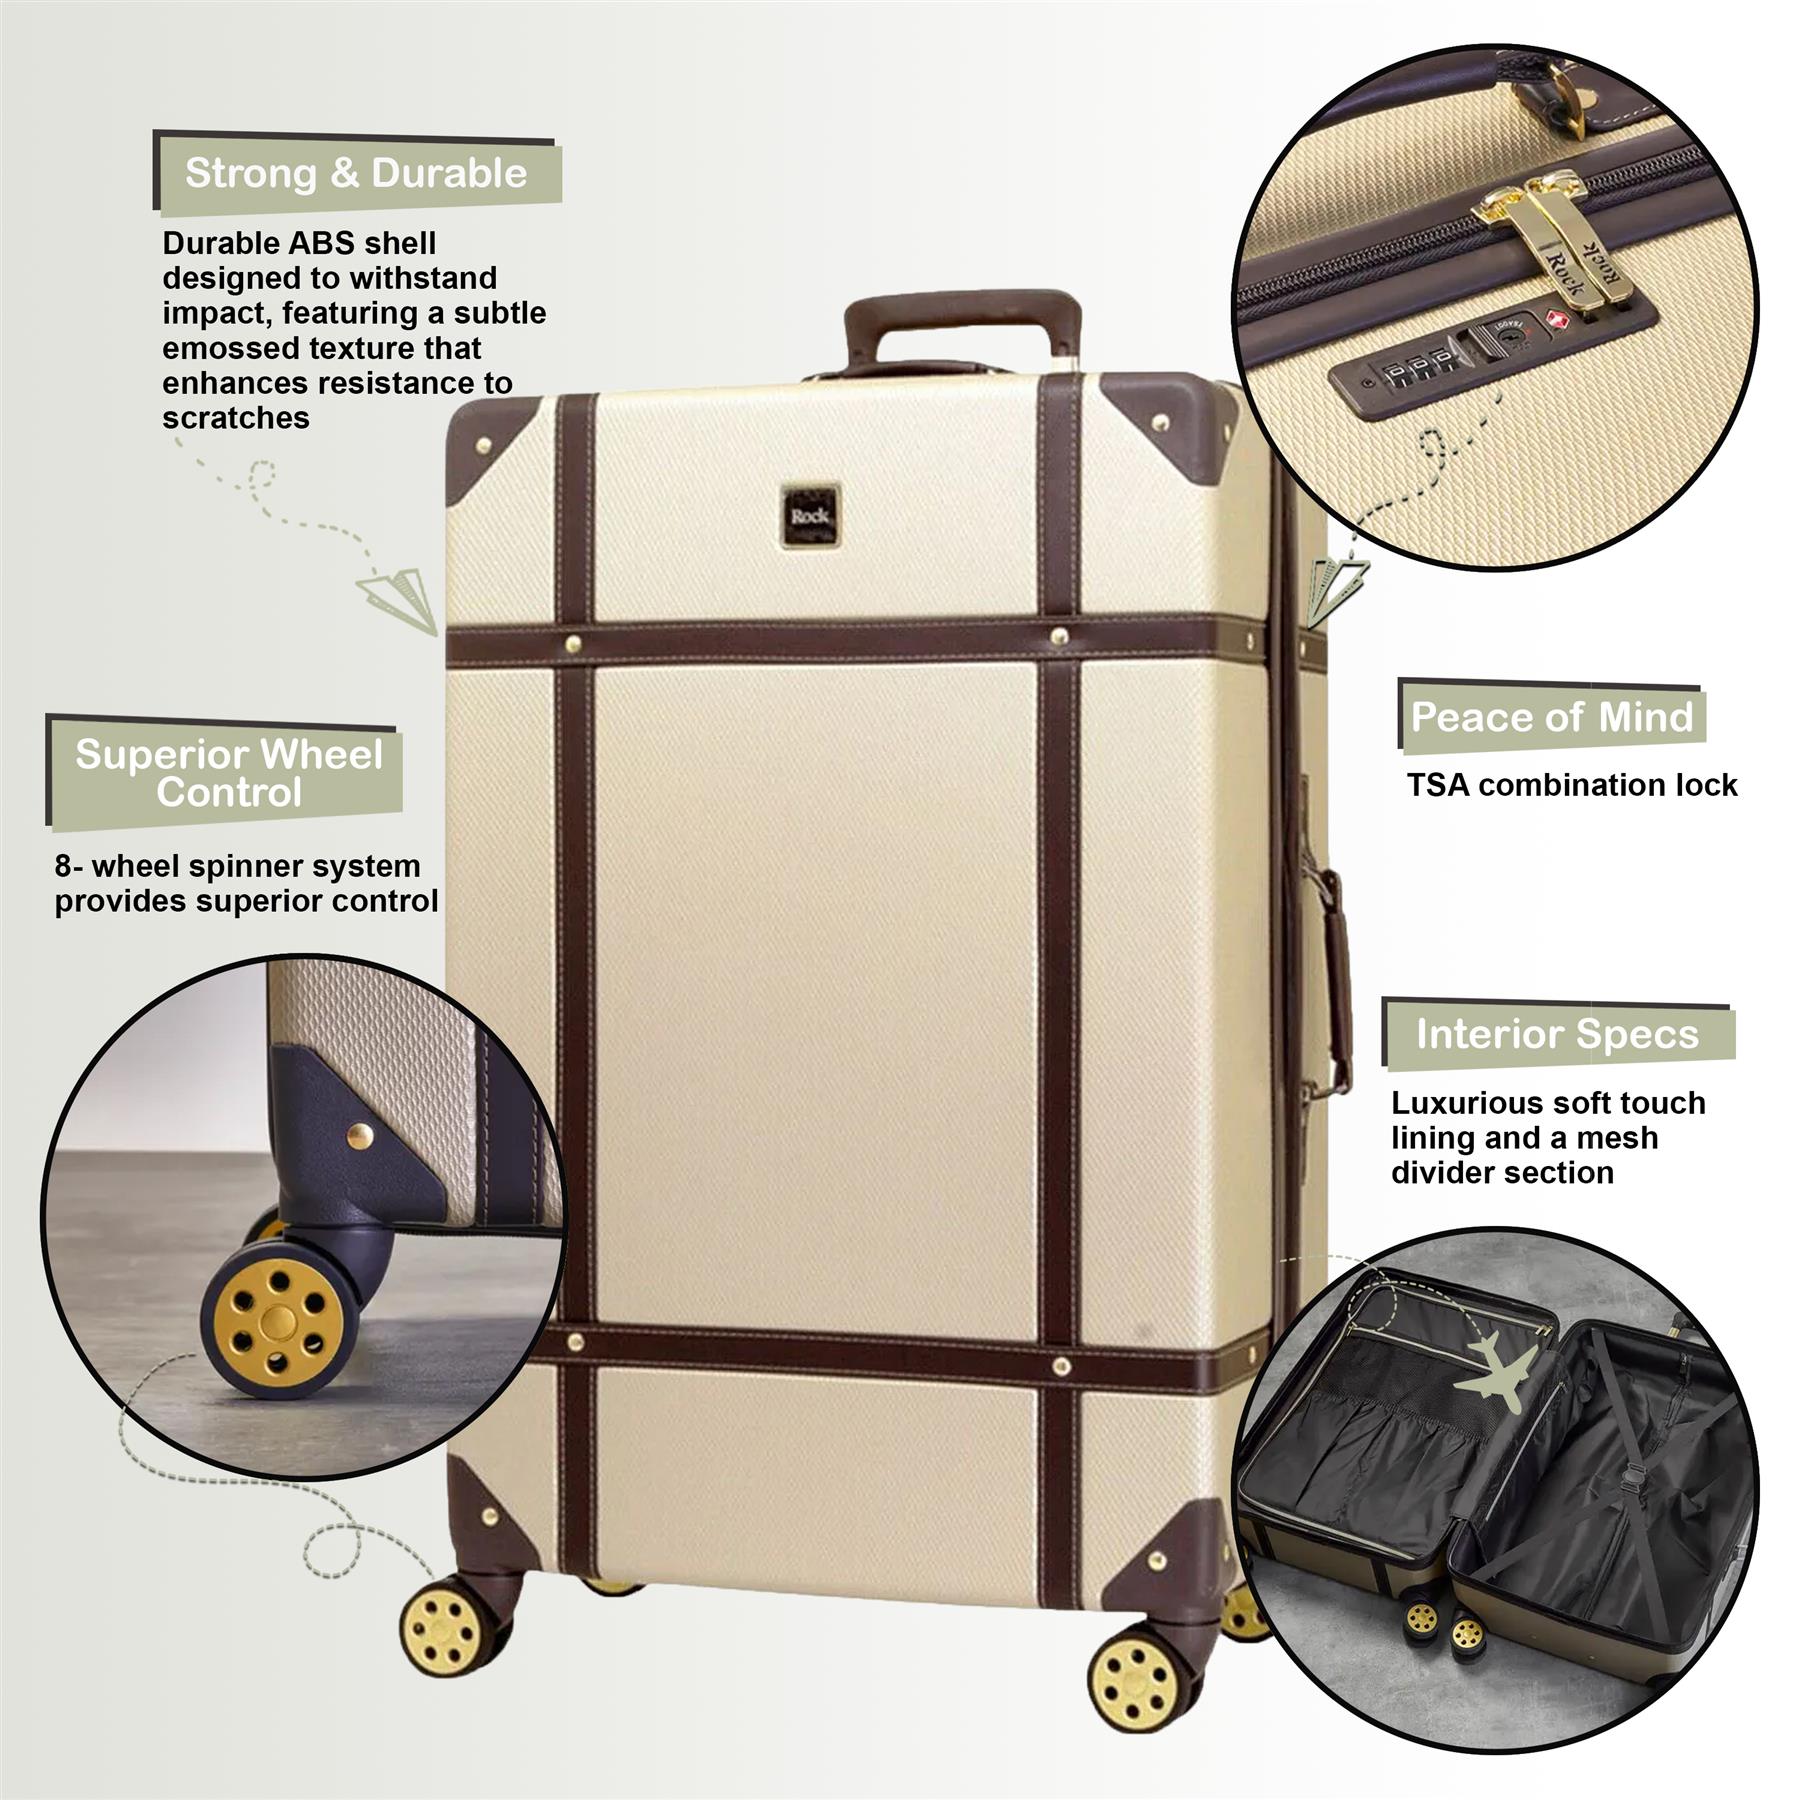 Alexandria Set of 3 Hard Shell Suitcase in Gold